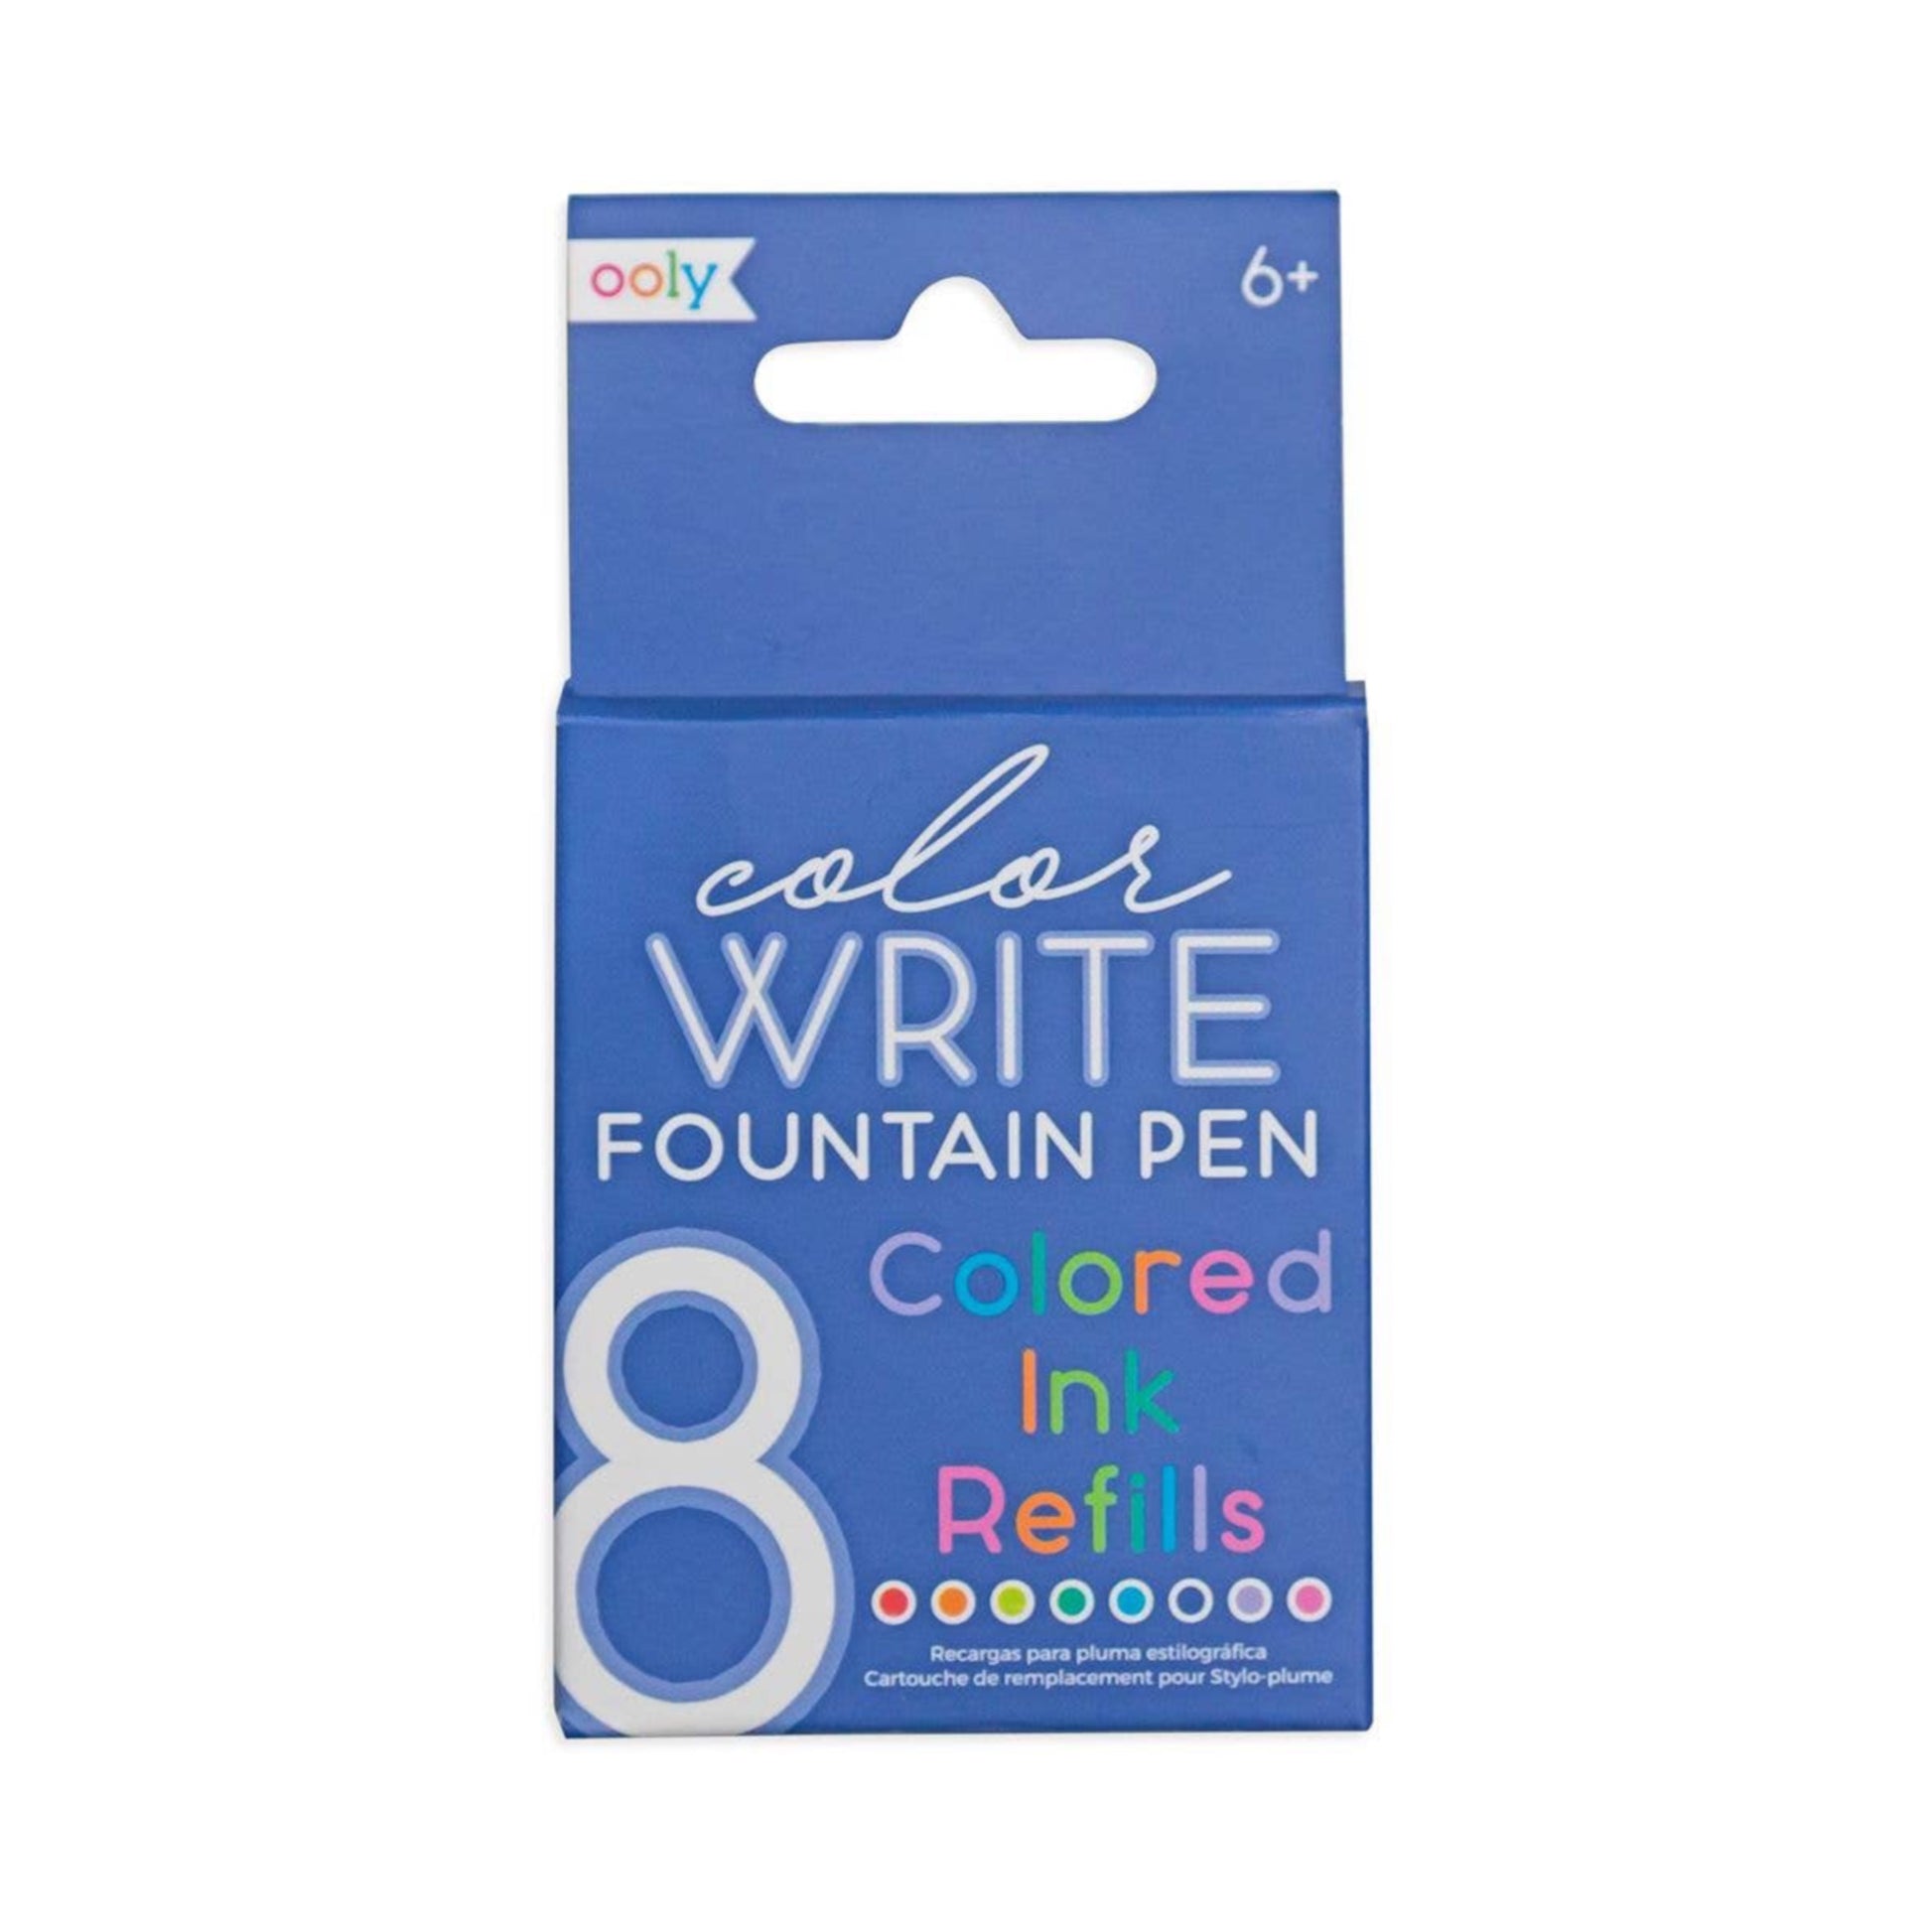 Ooly Color Write Fountain Pens Colored Ink Refills - by Ooly - K. A. Artist Shop